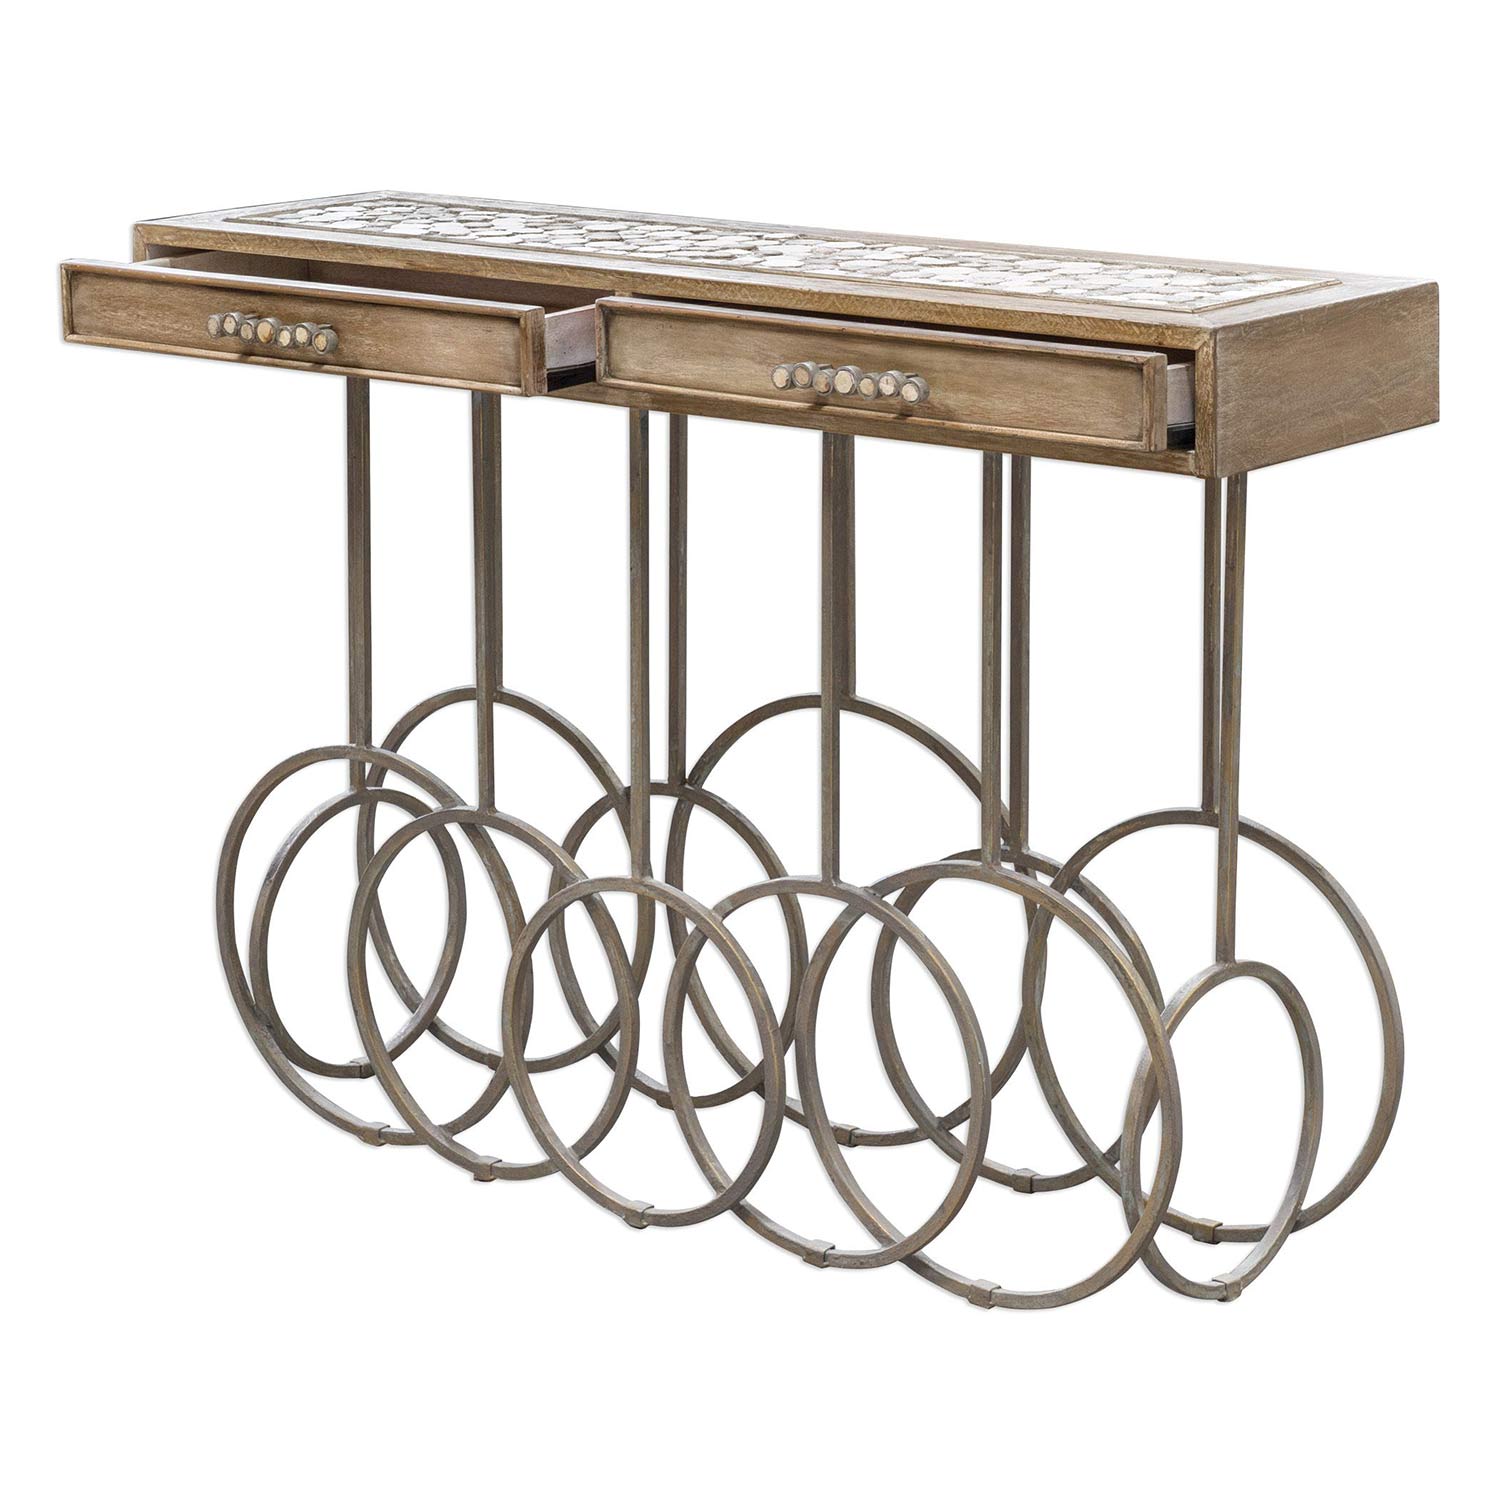 Uttermost Silana Stone Mosaic Console Table